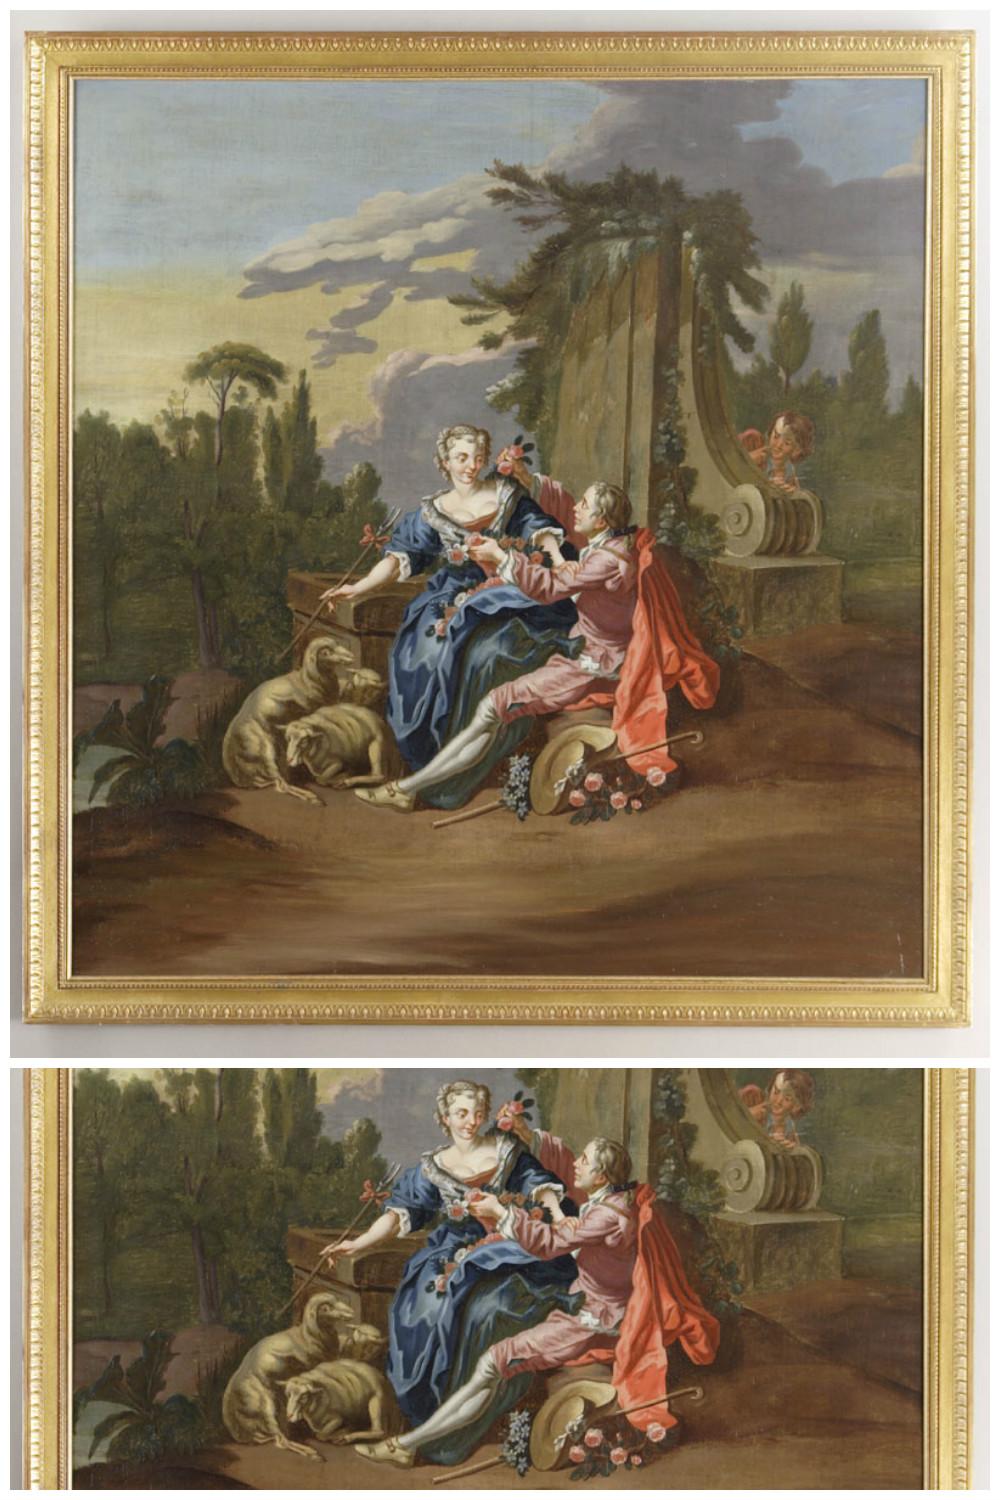 how is boucher's style in the painting above